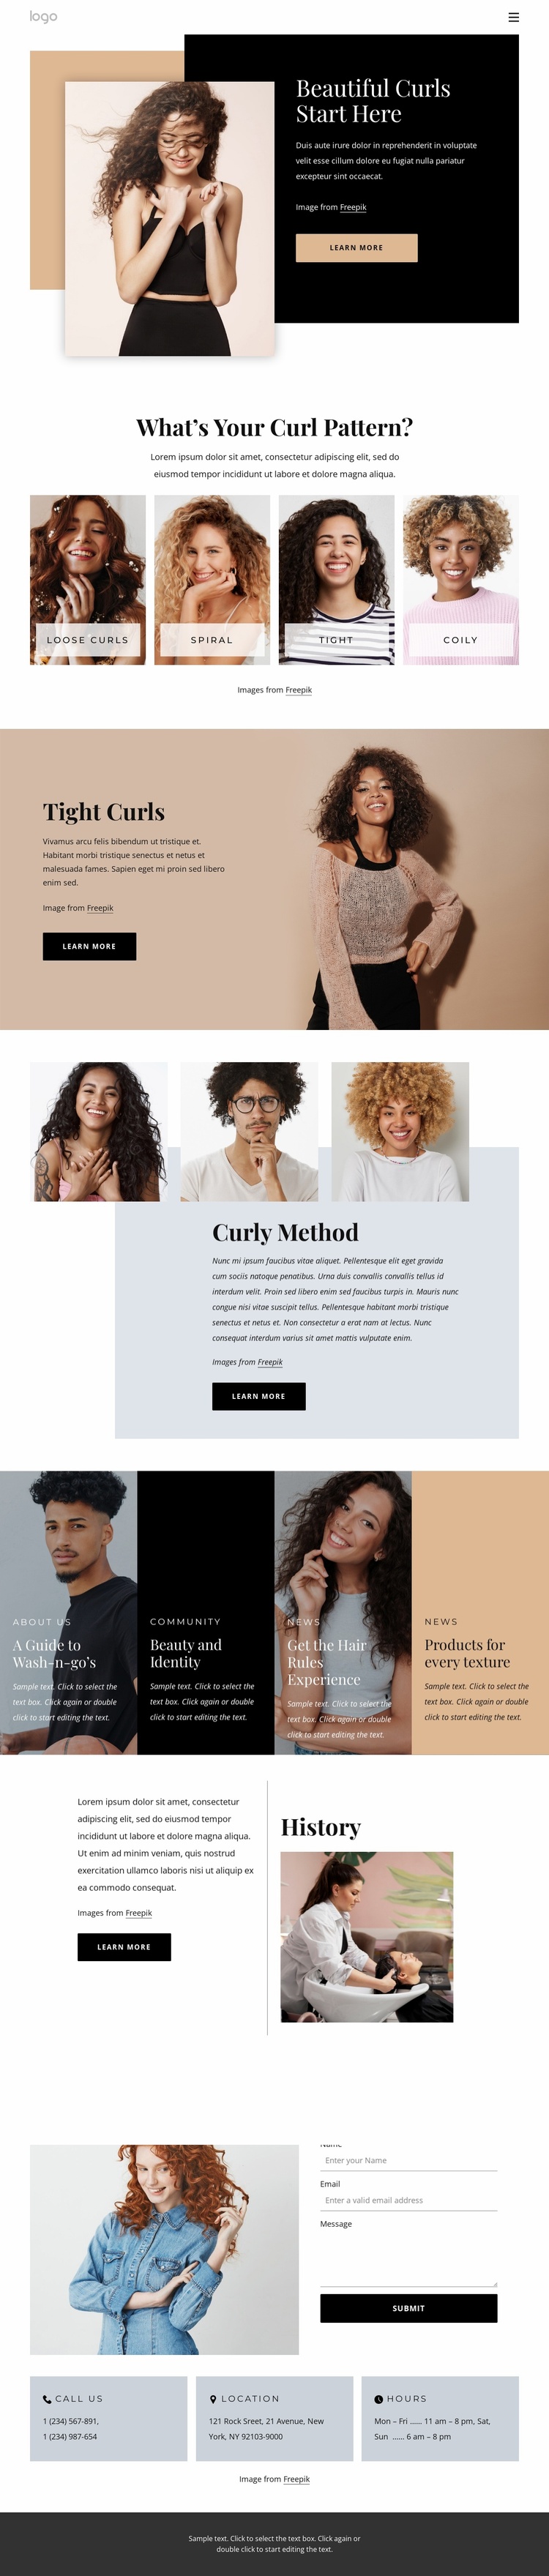 Bring out the best in your curls Ecommerce Website Design